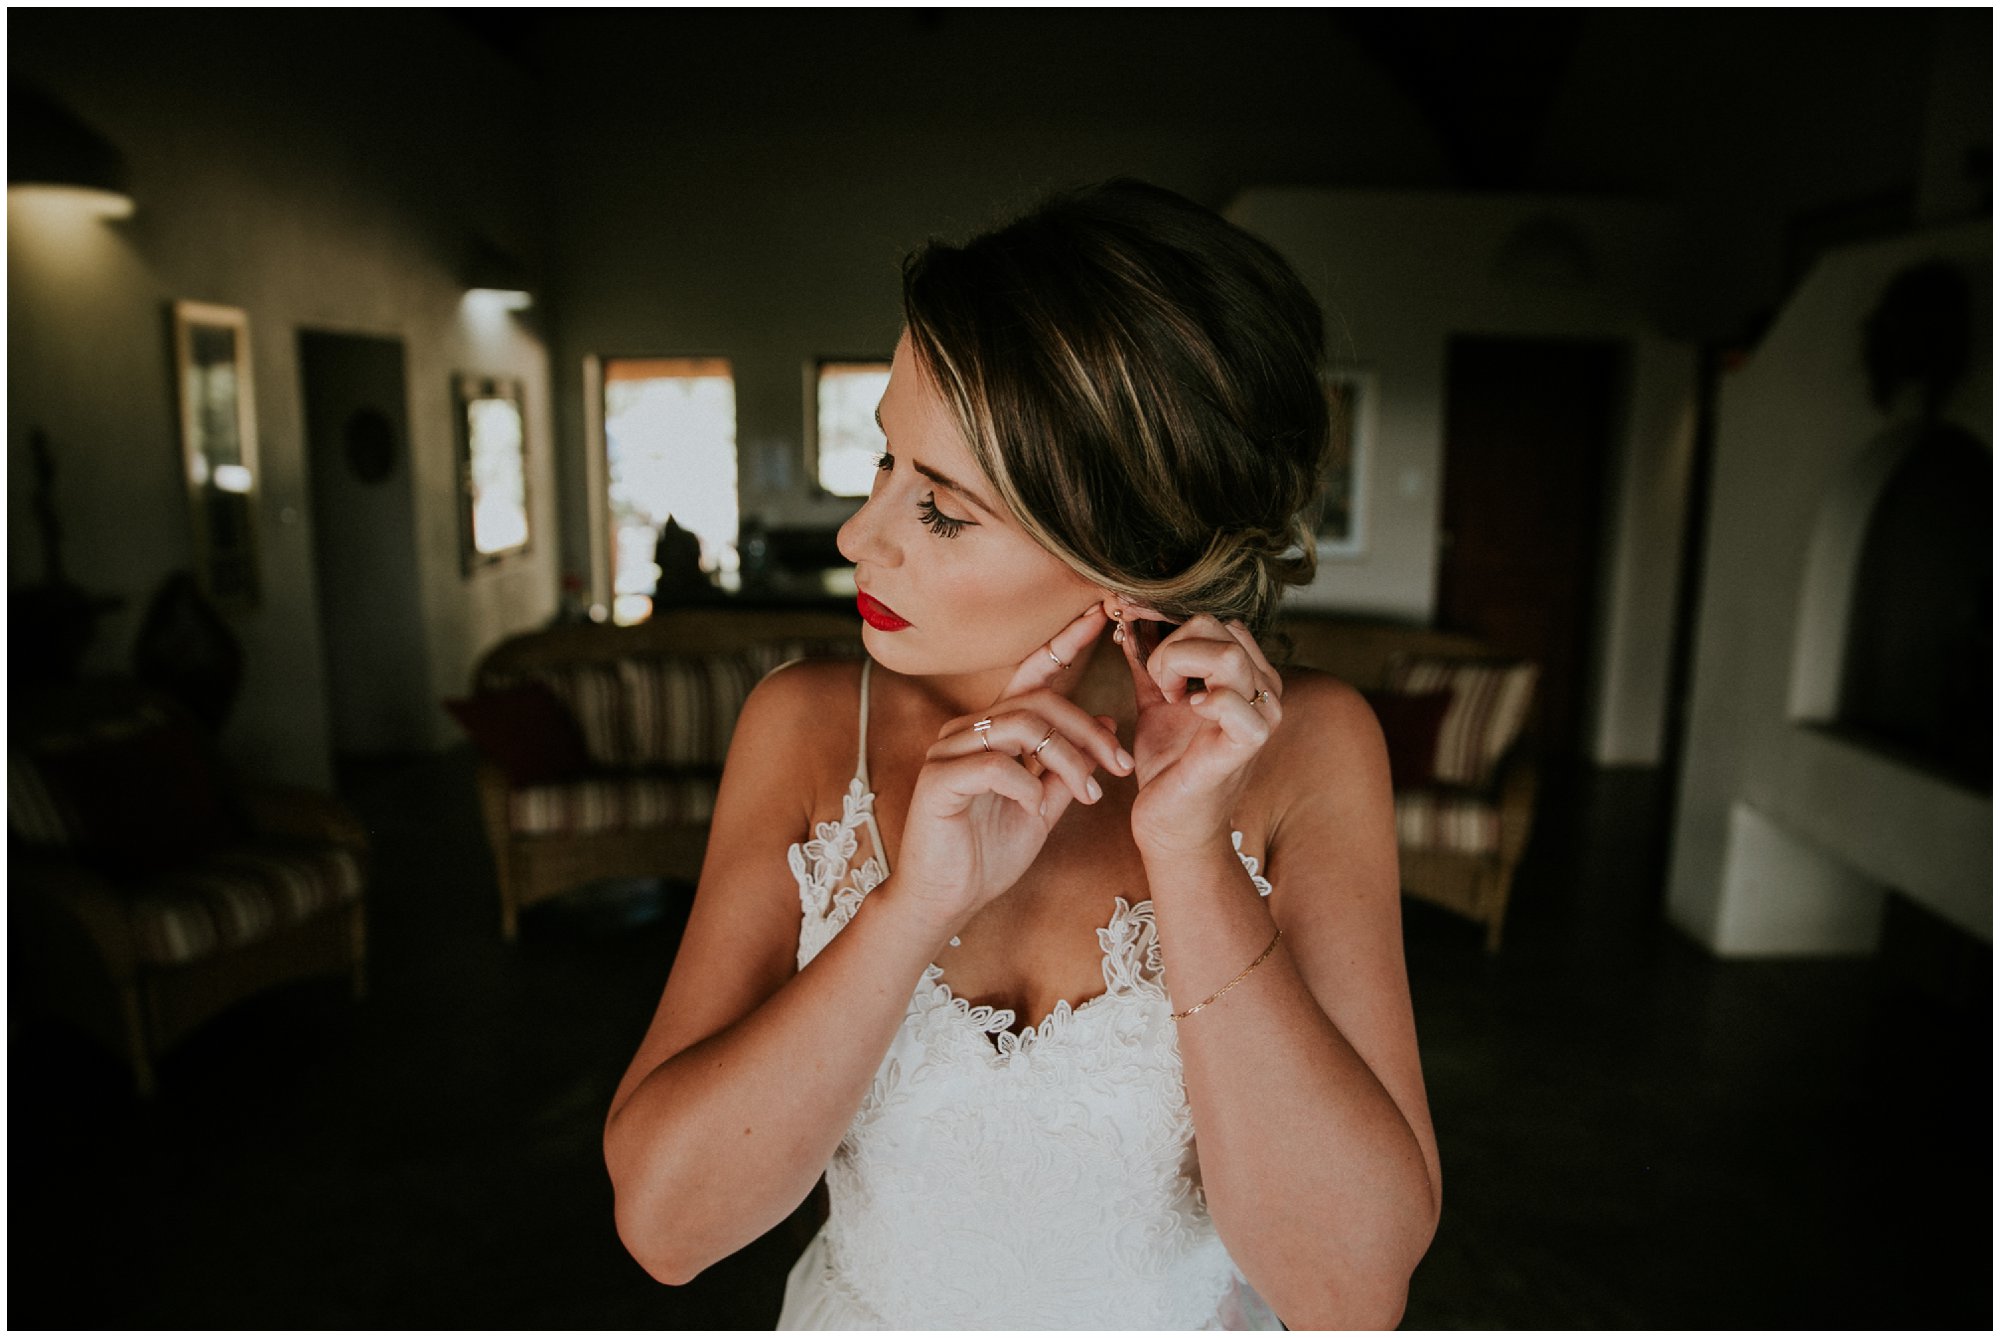 Bride Bridal Portraits at an Outdoor Bohemian Destination Wedding at Francine’s Venue in Hoedspruit Limpopo by Junebug World's Best Photographer Maryke Albertyn Award Winning International Alternative Moody Photography based in Cape Town South Africa